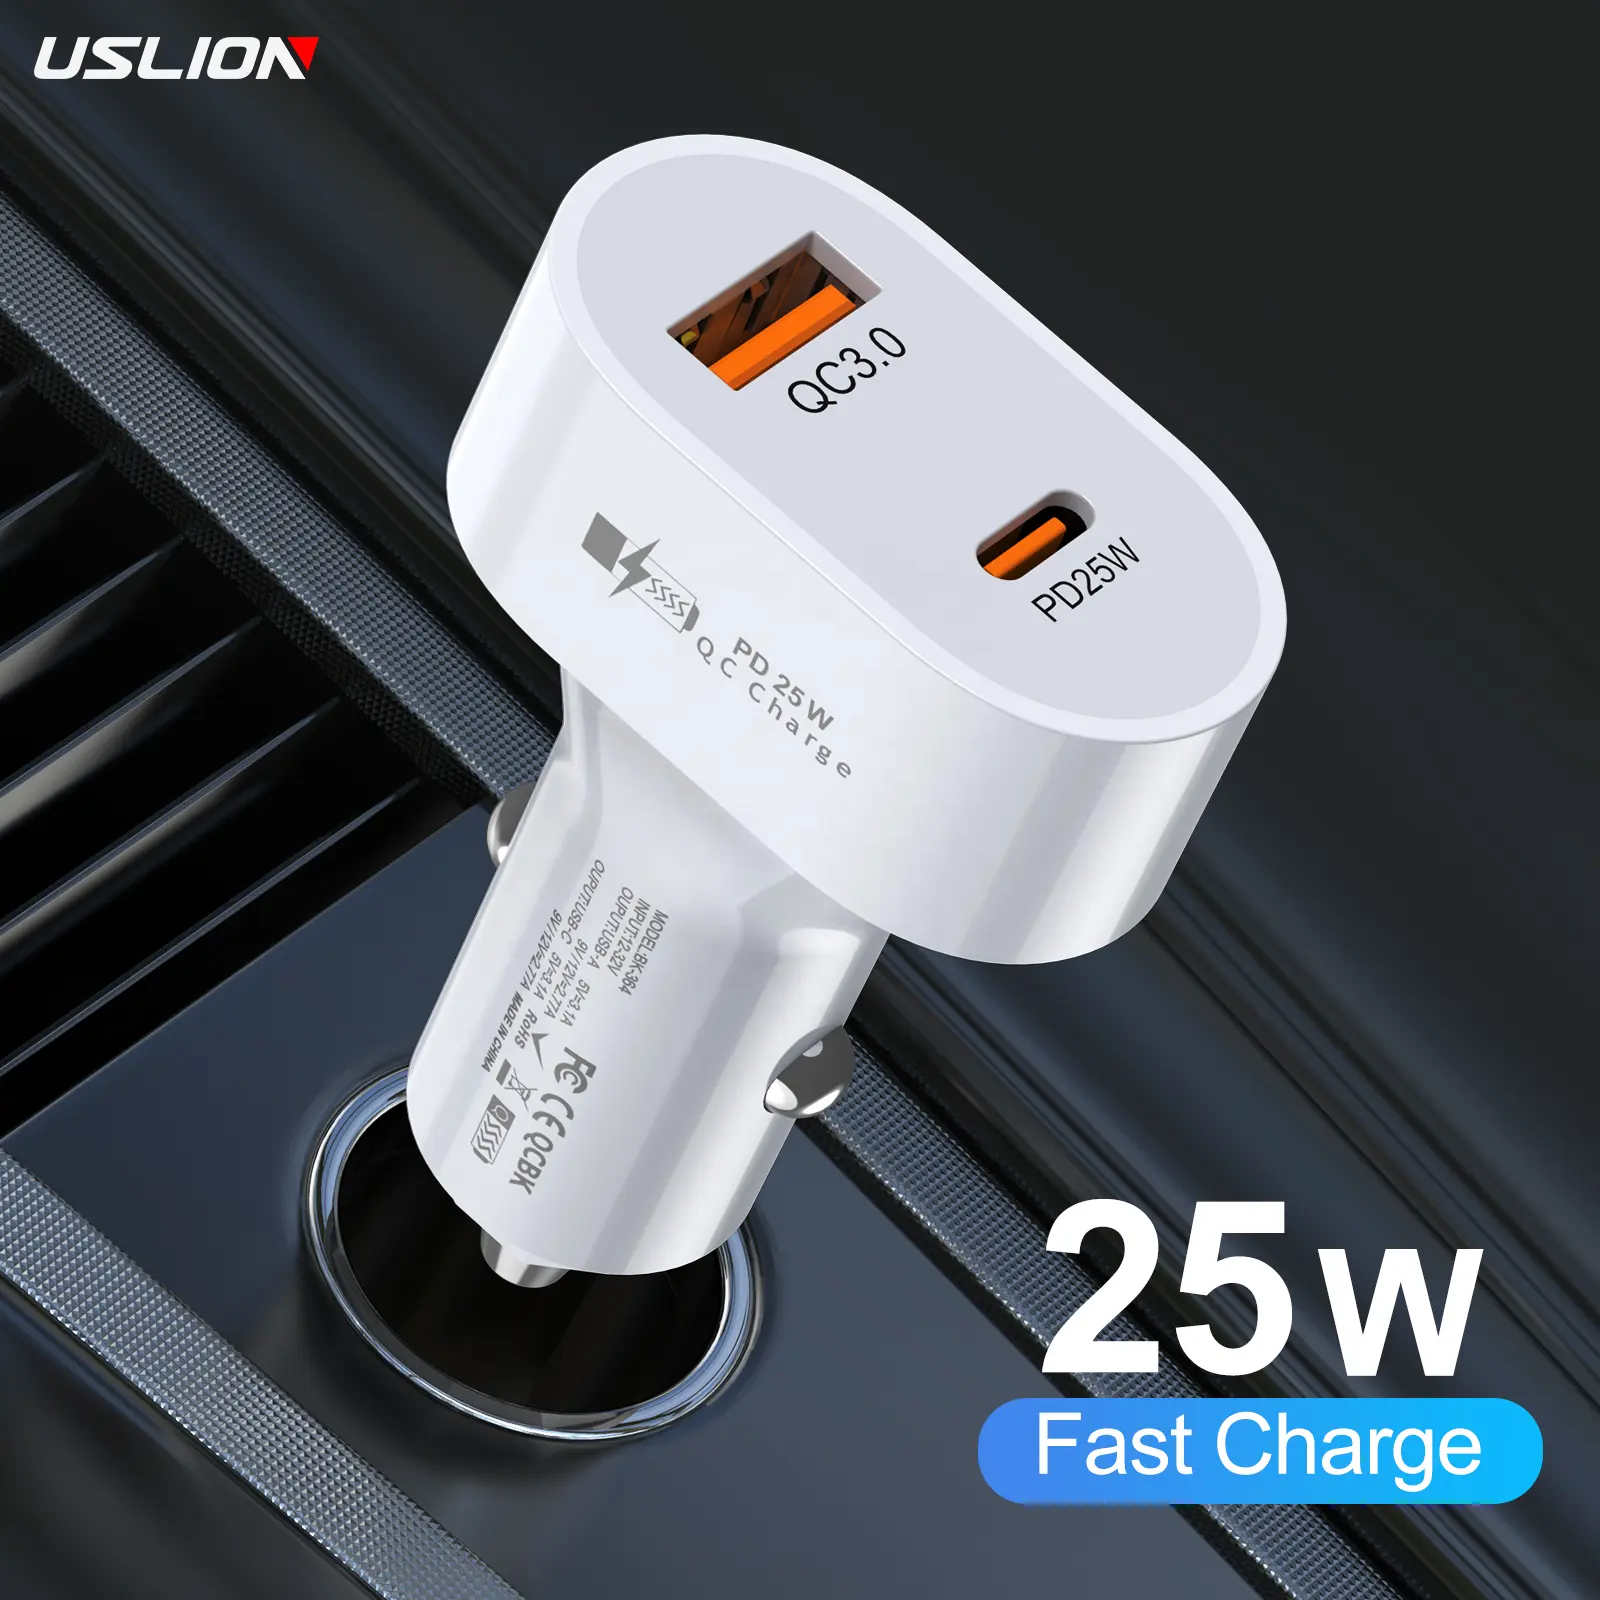 USLION OEM LOGO 25W PD + USB Car Charger Dual Ports Electric Car Phone Charger Fast Charging For Samsung Xiaomi